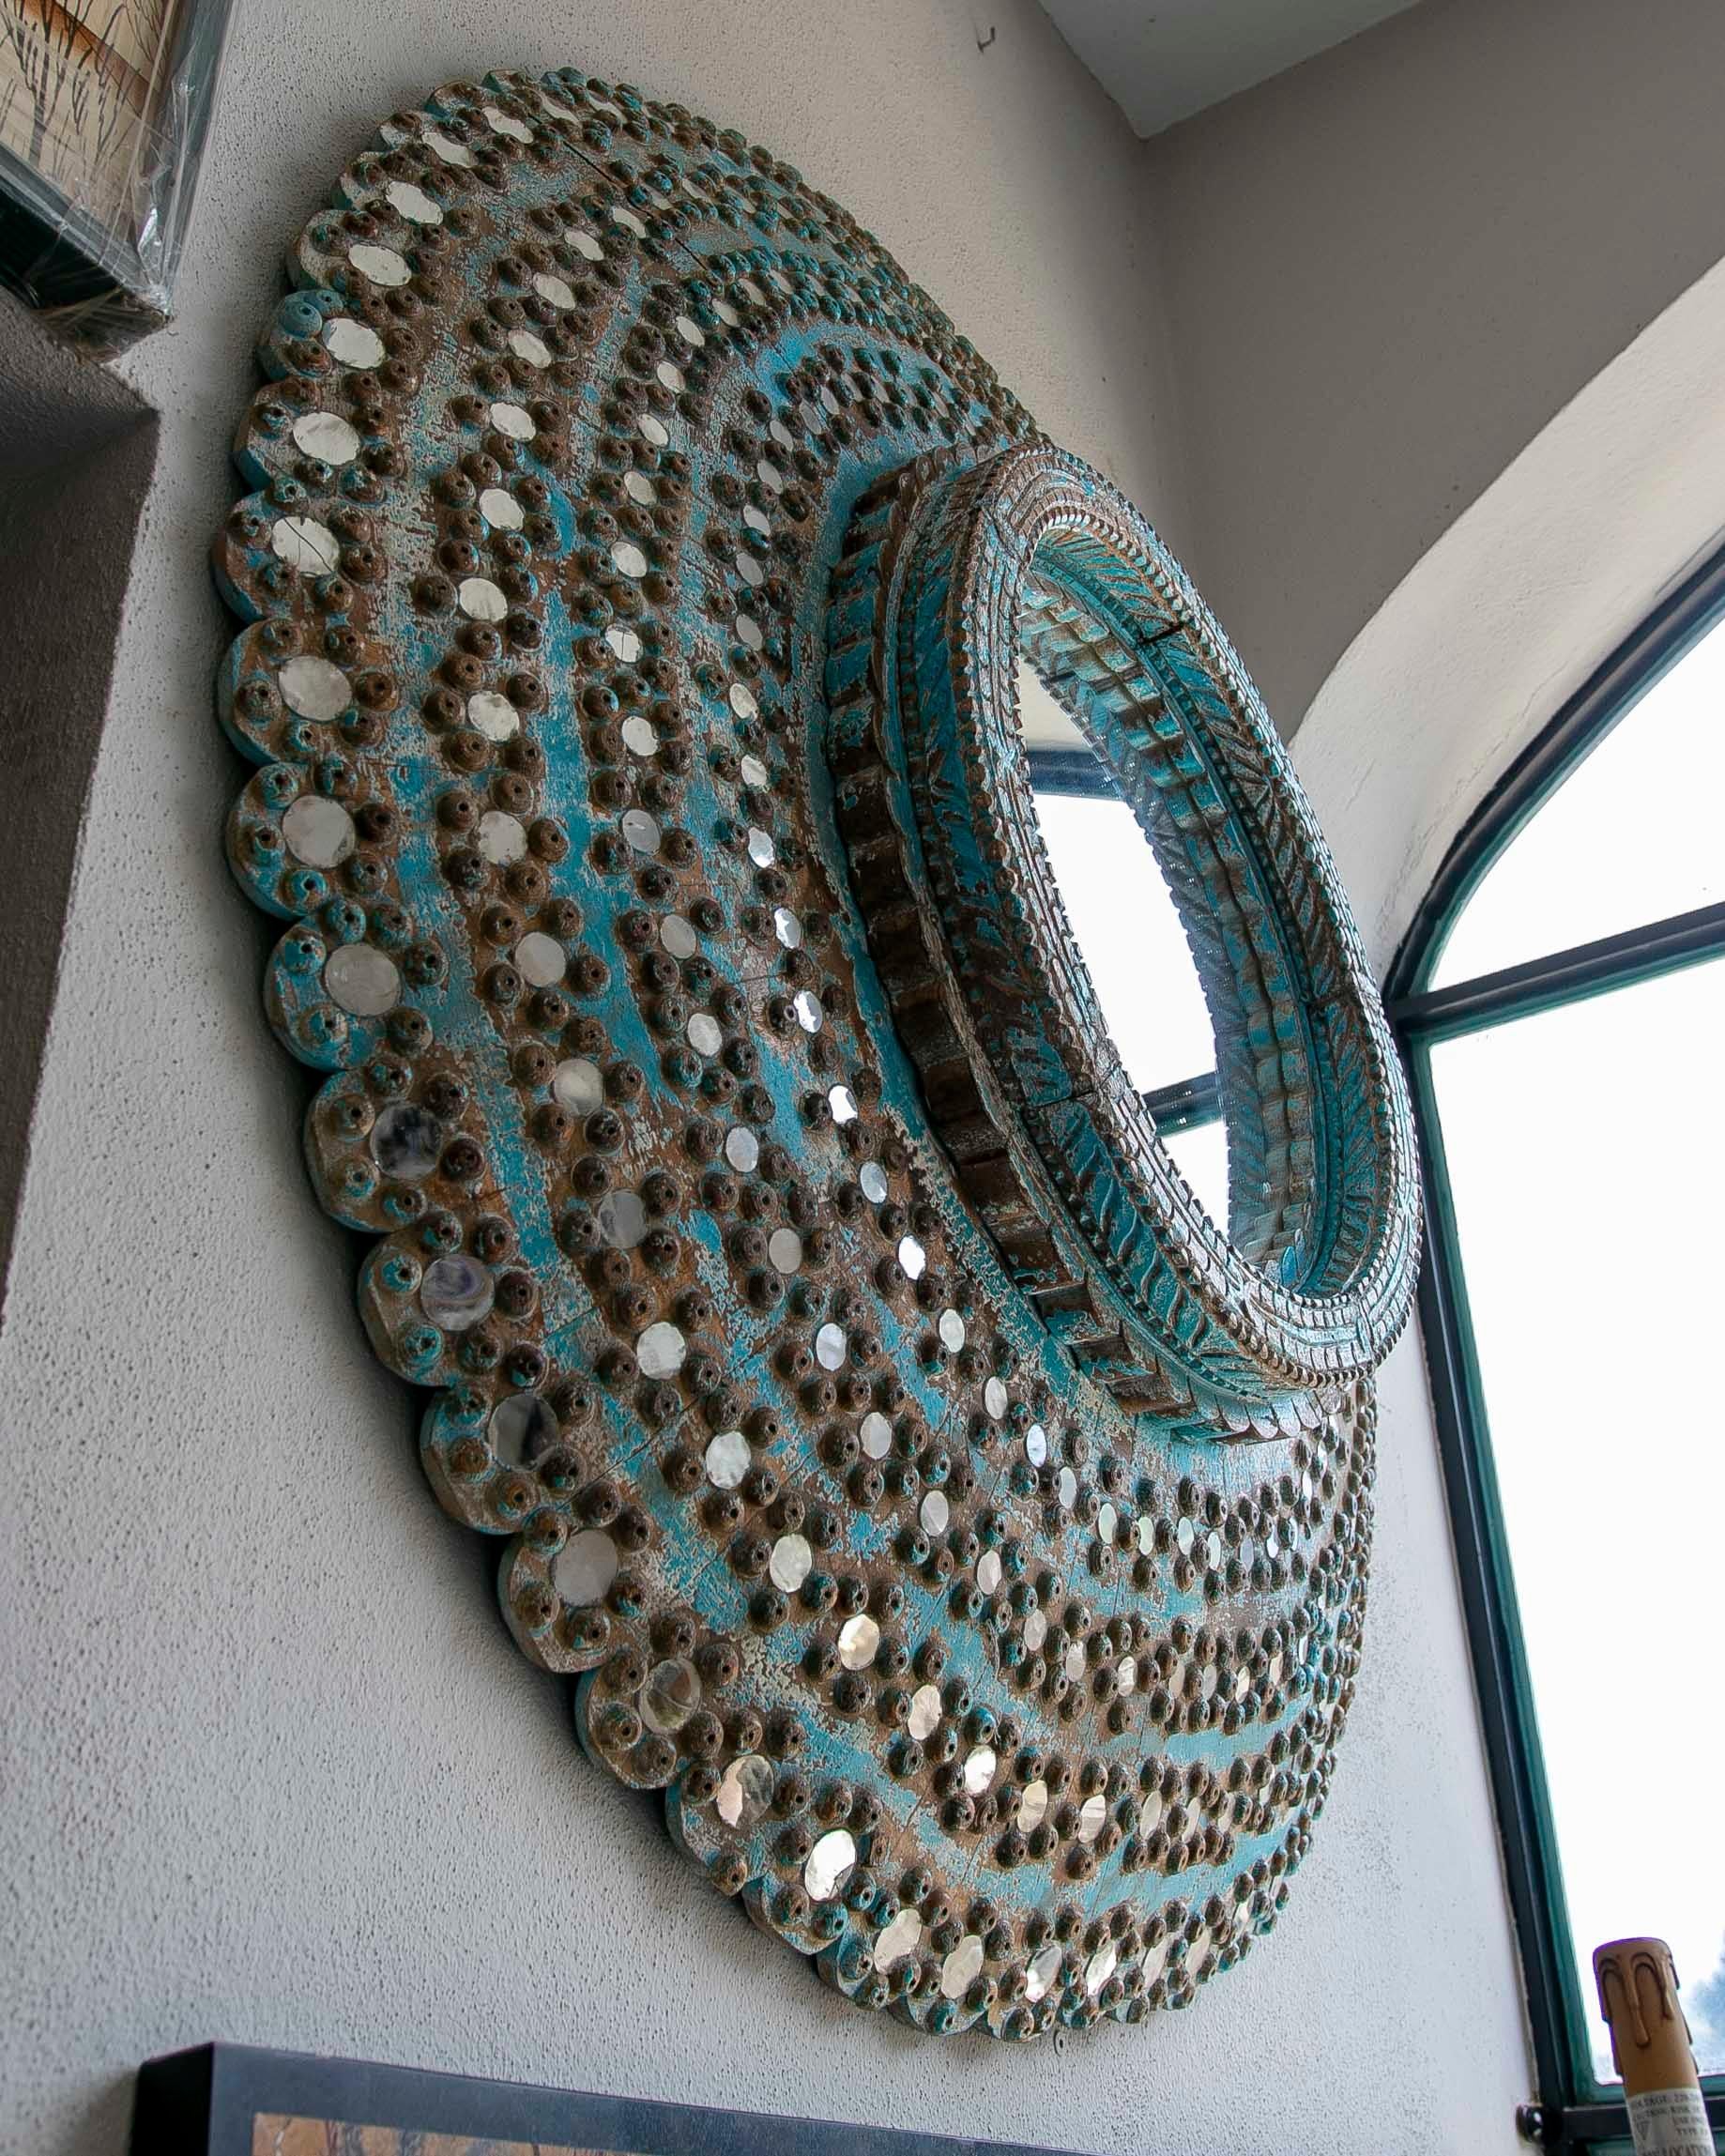 Round Wooden Wall Mirror Polychromed in Shades of Blue. Circular Mirror Decorated with Small Mirrors and Iron Nails
